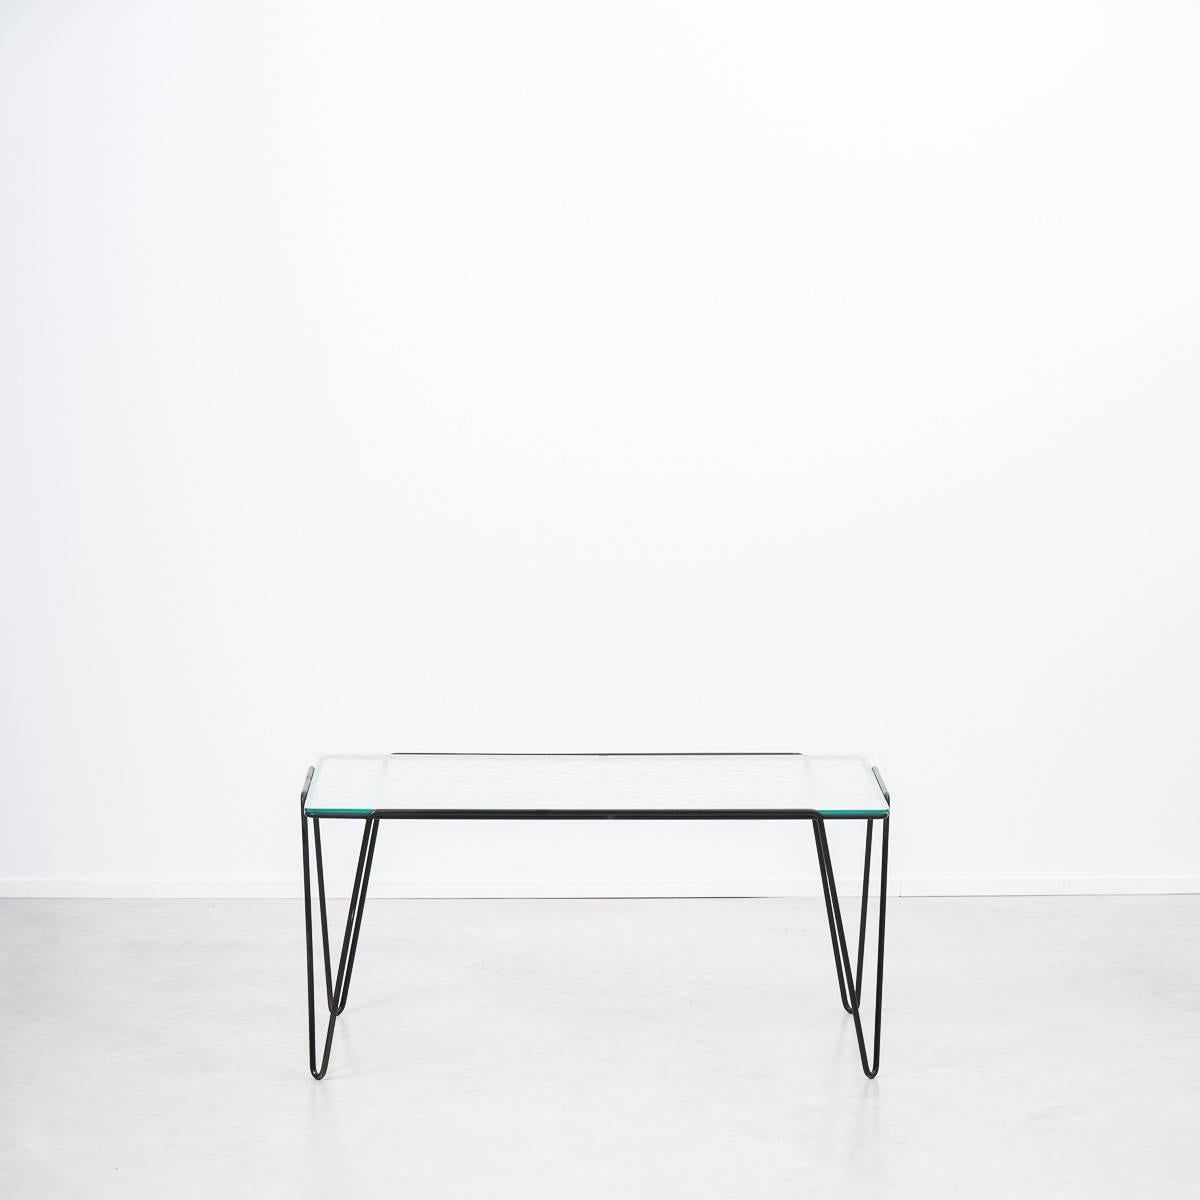 Minimalist ripple glass coffee table designed by Arnold Bueno de Mesquita for Spurs, Holland, 1955. Made from enamelled steel rod and safety ripple glass. A very important piece of Dutch modern design. A rare thing, hard to come by. 

